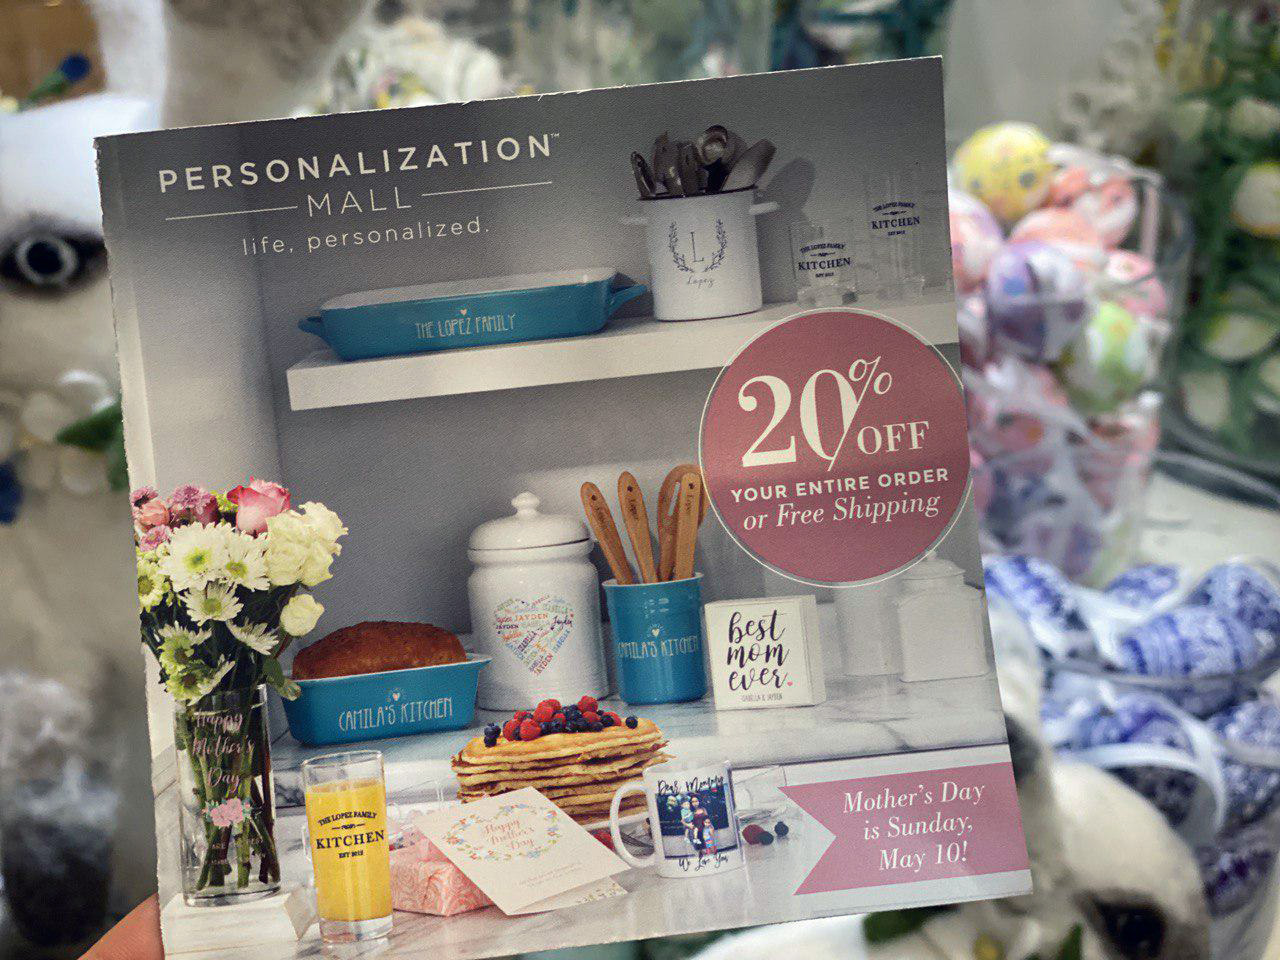 PersonalizationMall 20% OFF Easter Coupon